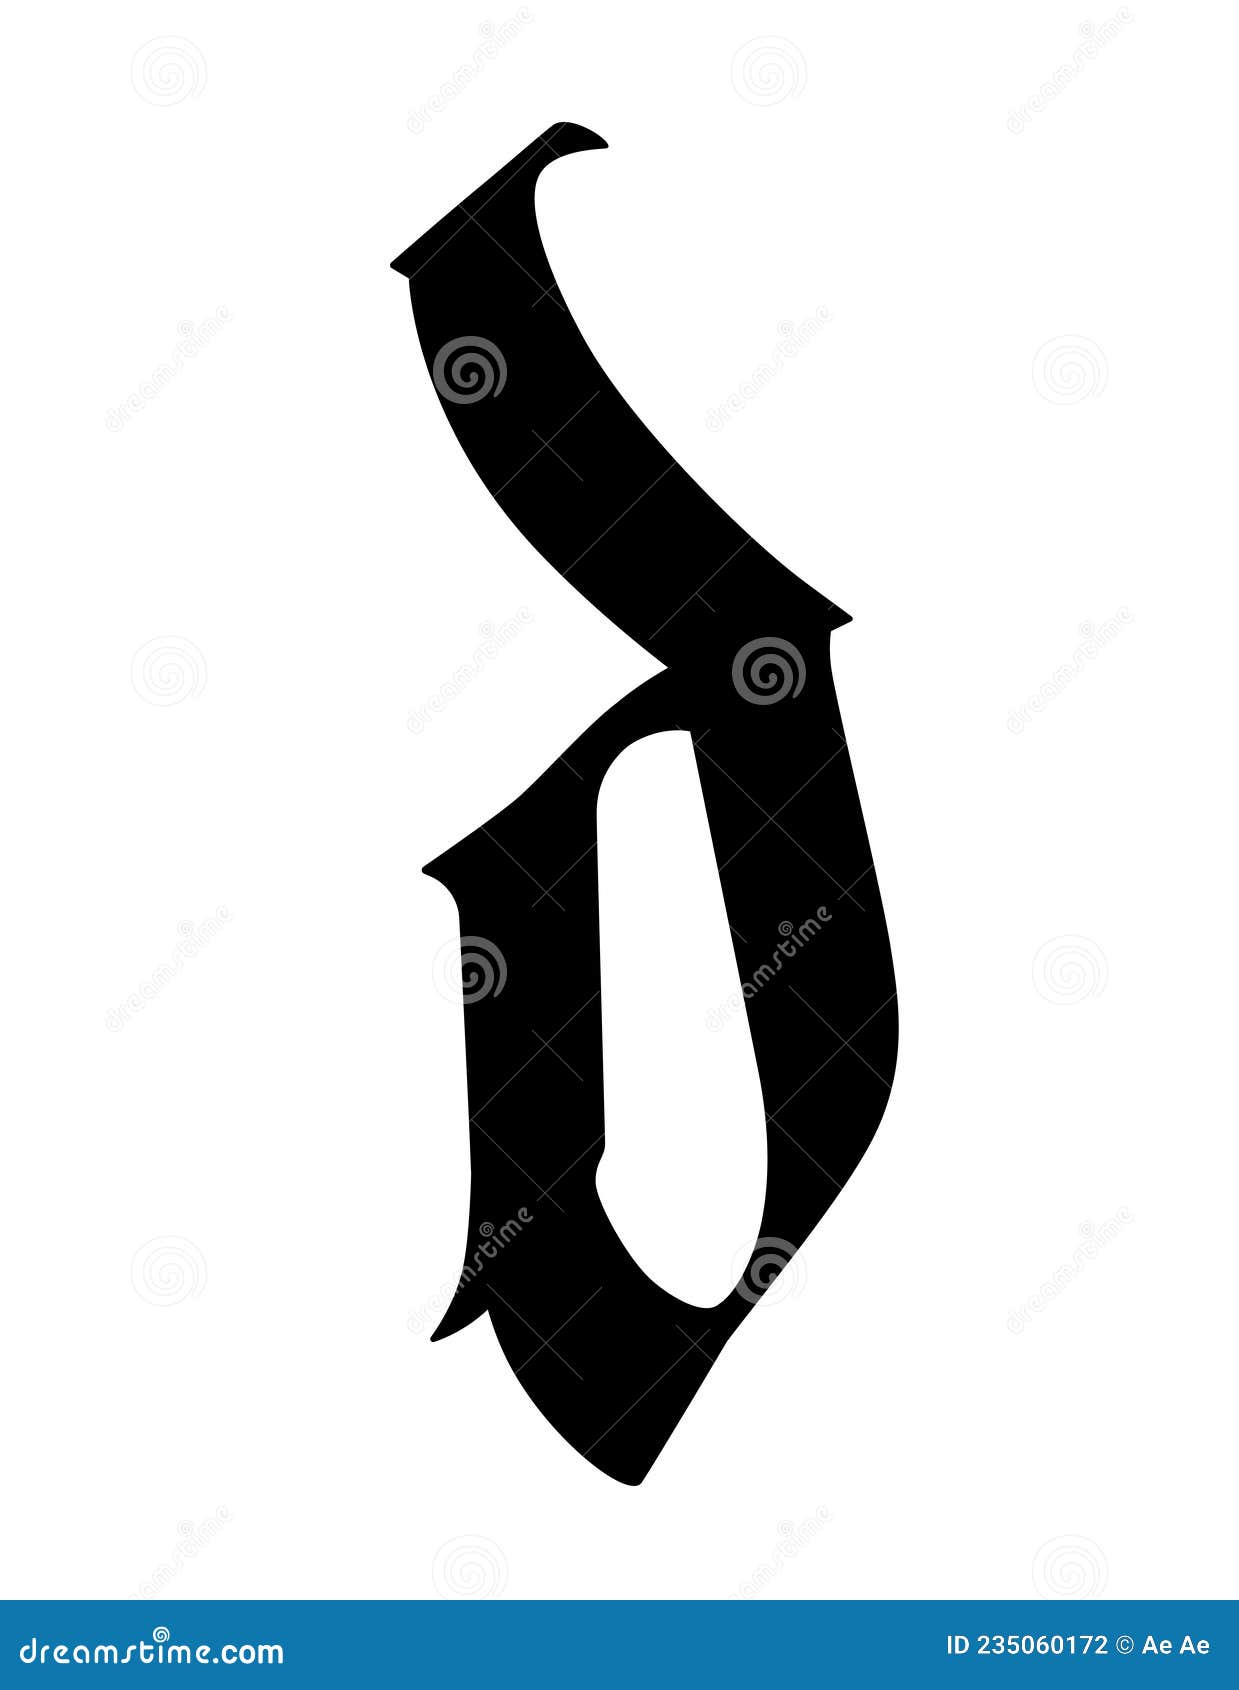 I want to design a tattoo that has the letters A, J, D, E mixed together